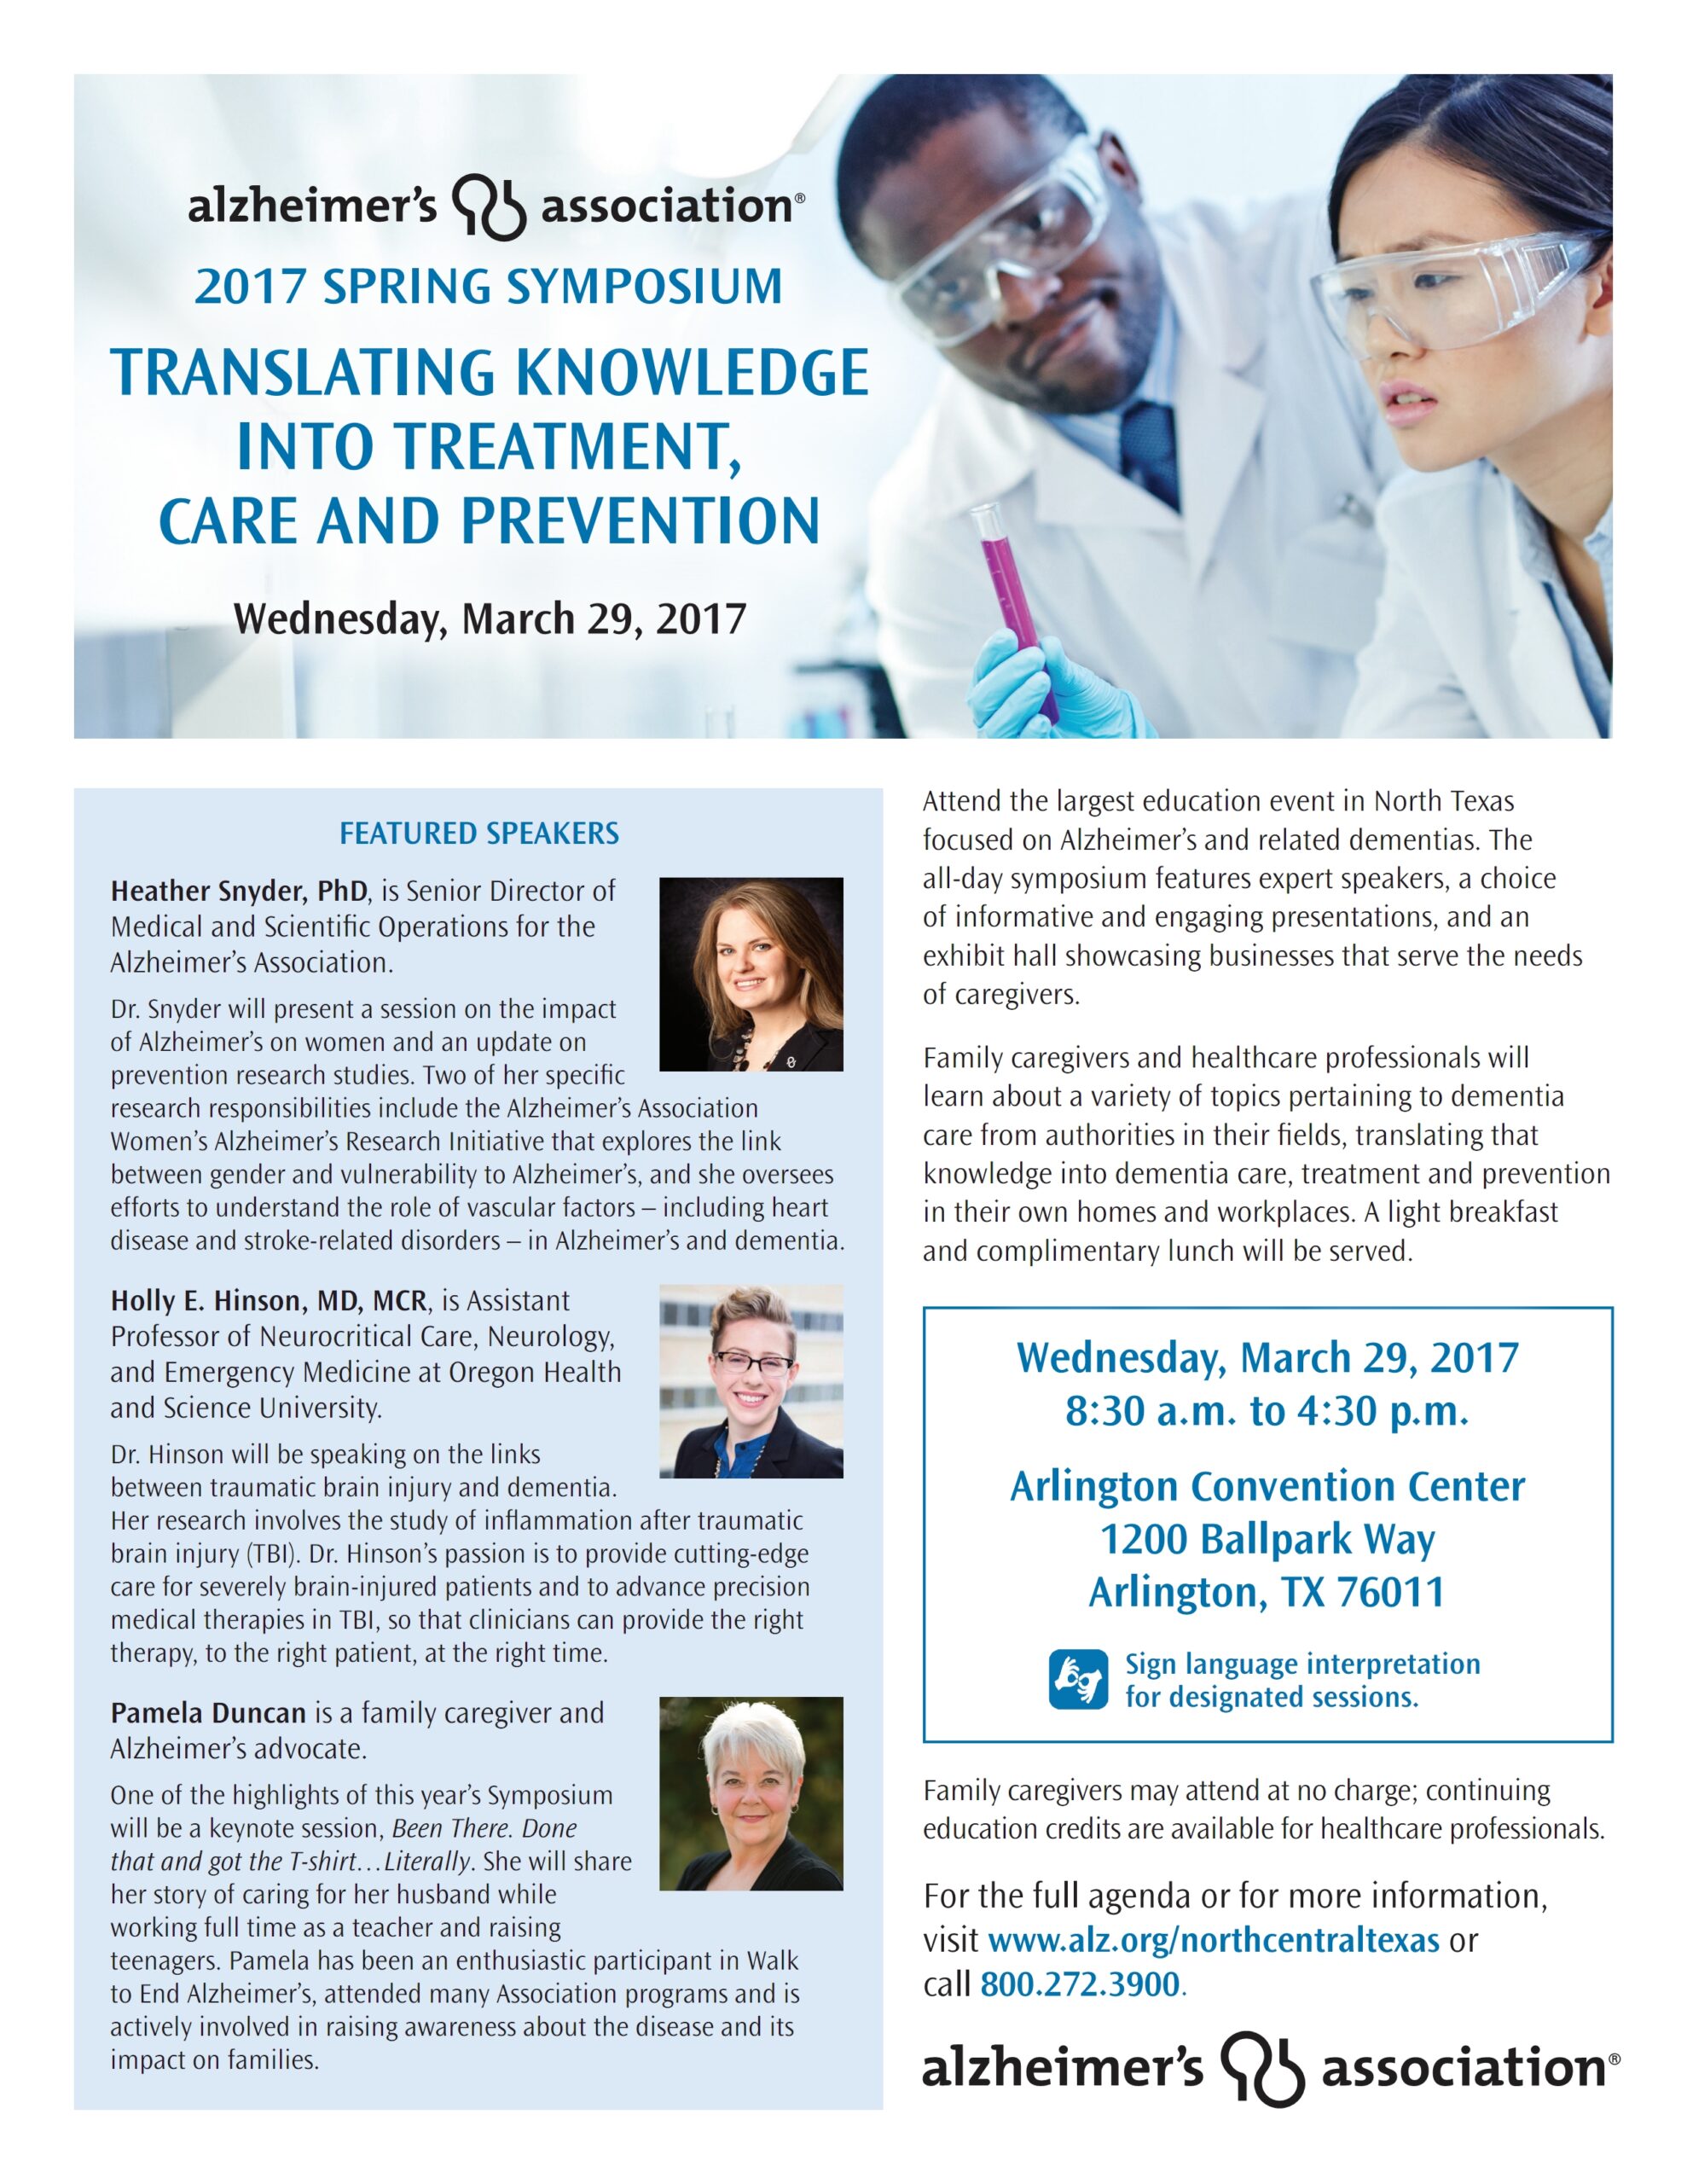 Alzheimer's Association flyer for Translating Knowledge into Treatment, Care and Prevention, Wednesday, March 29, 2017